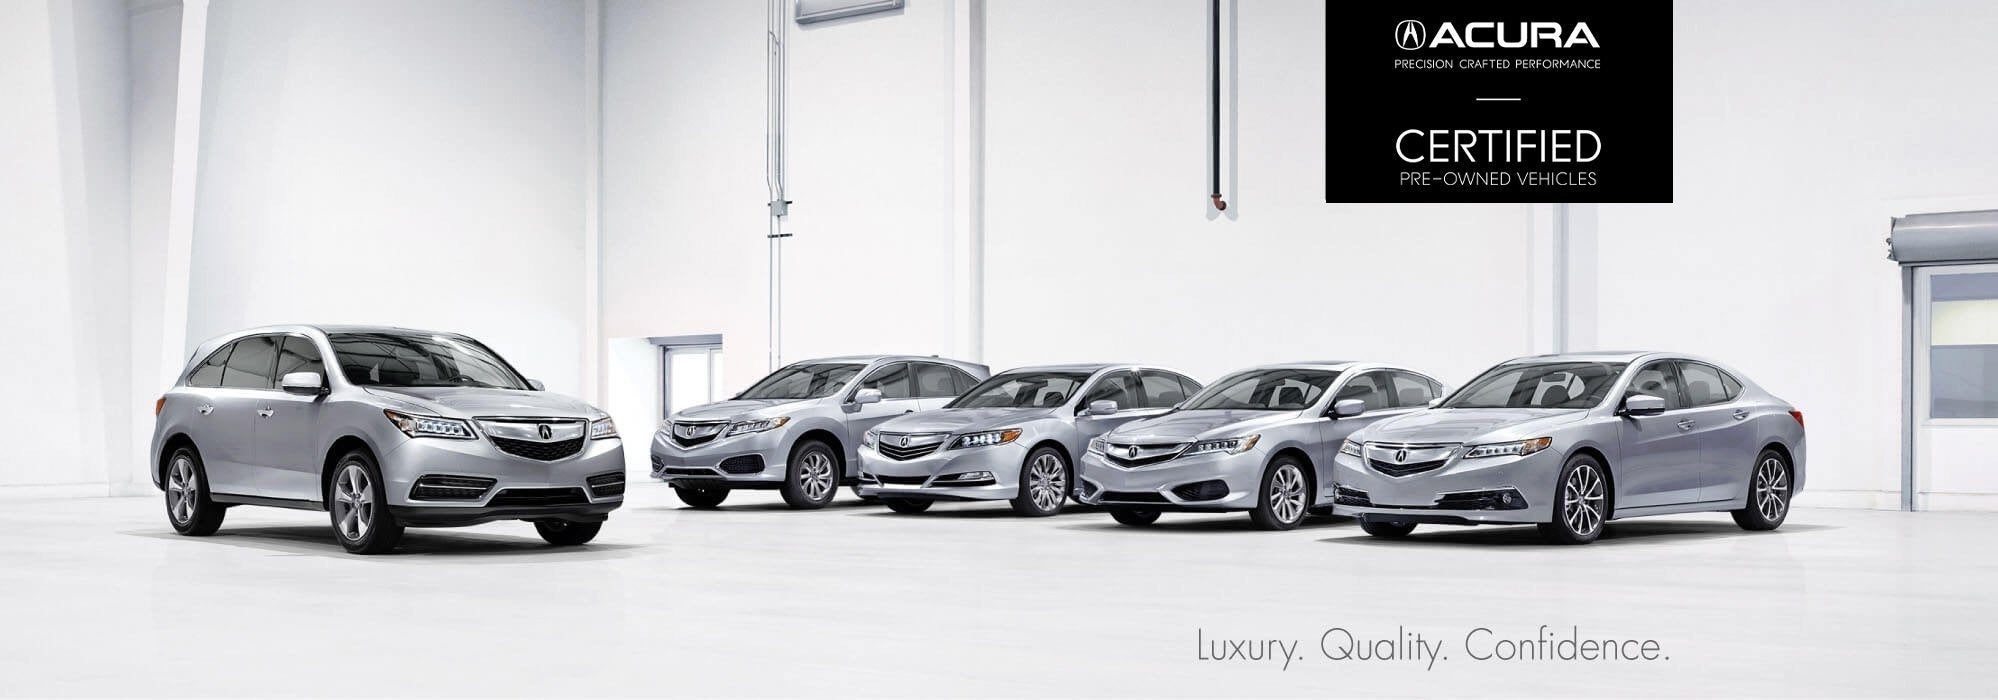 banner image of Acura Certified Pre-Owned